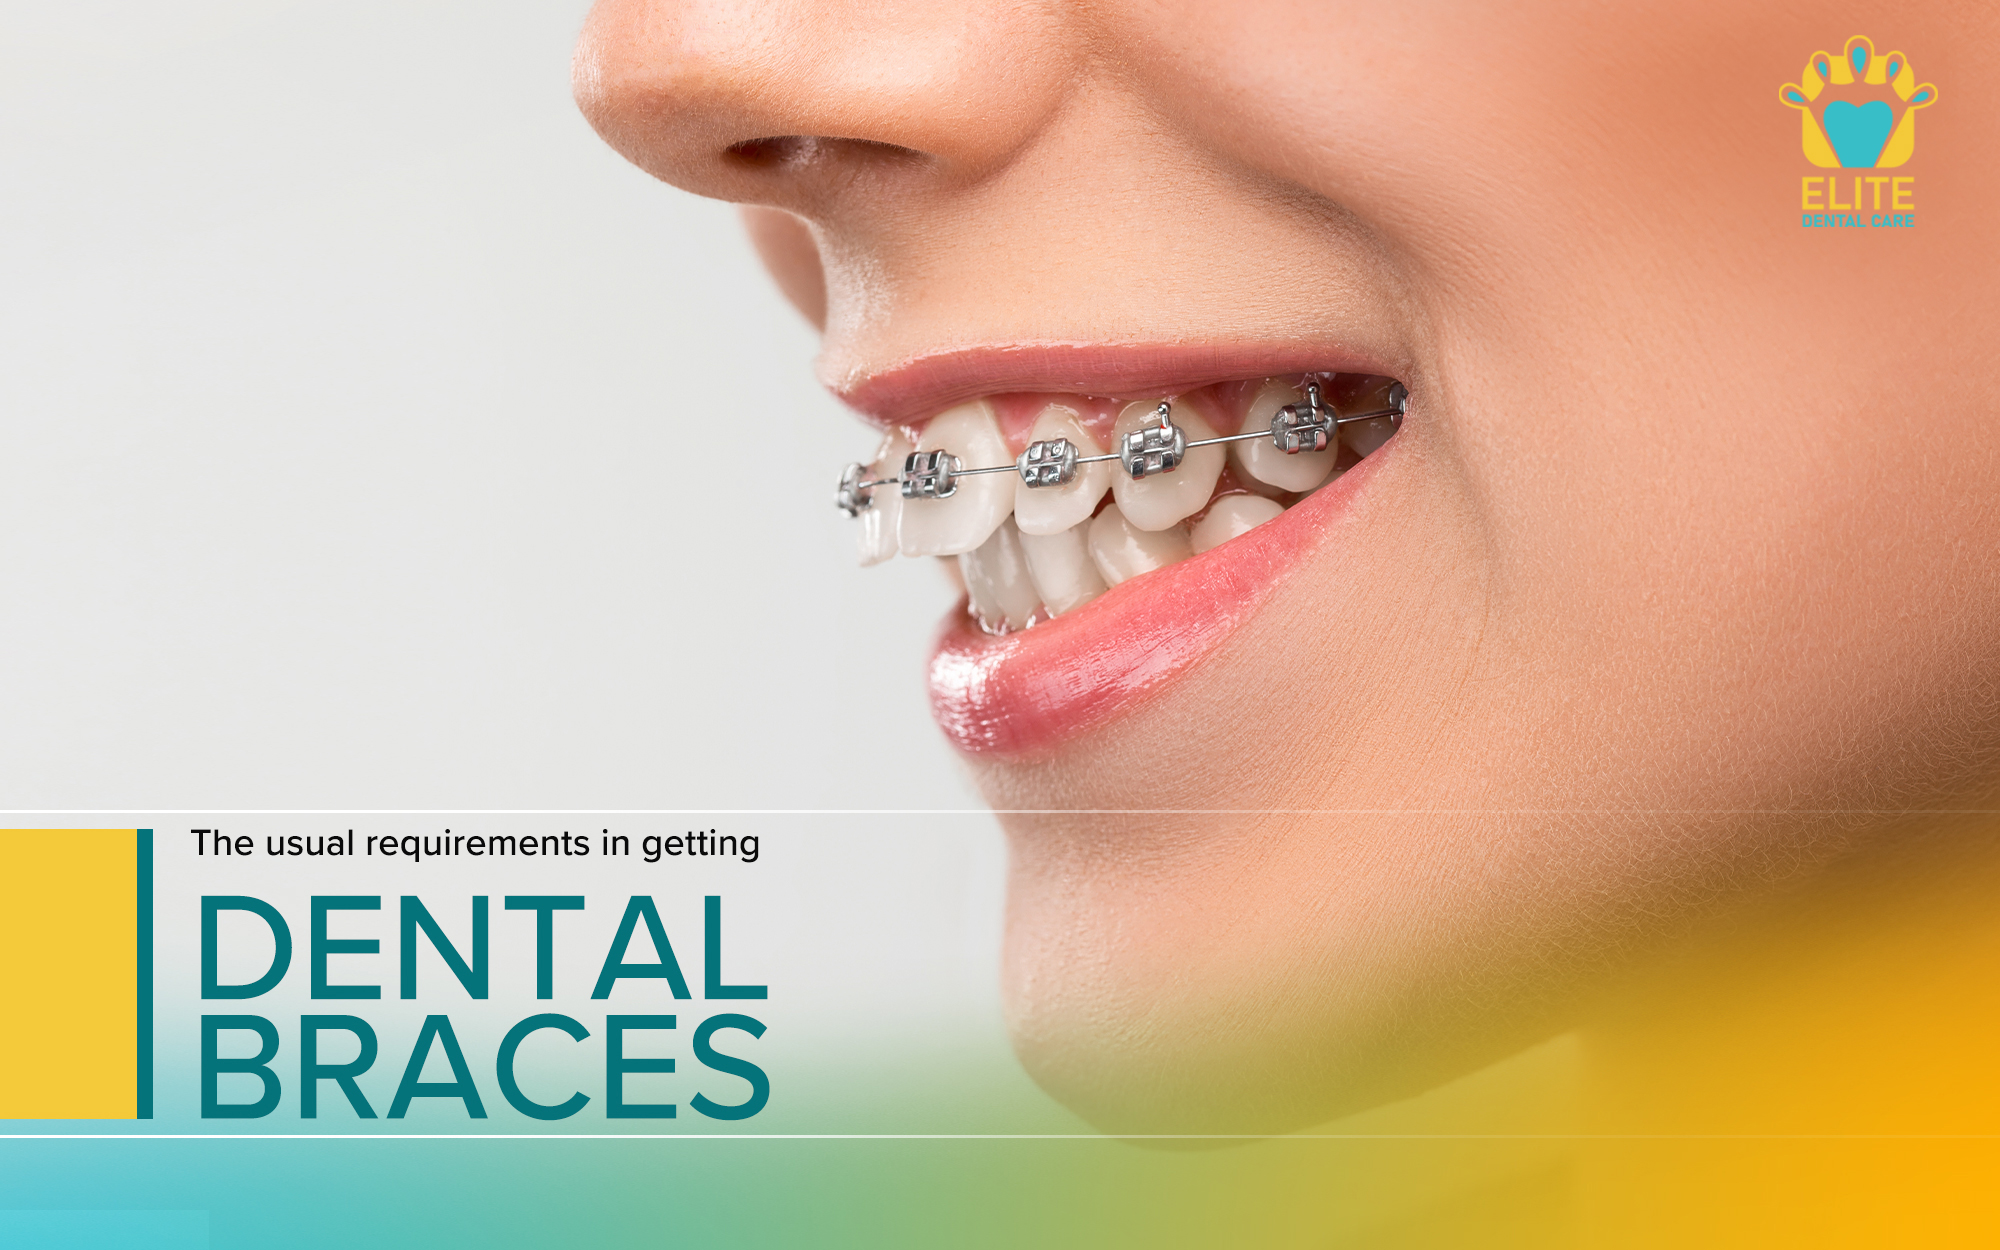 The usual requirements in getting dental braces